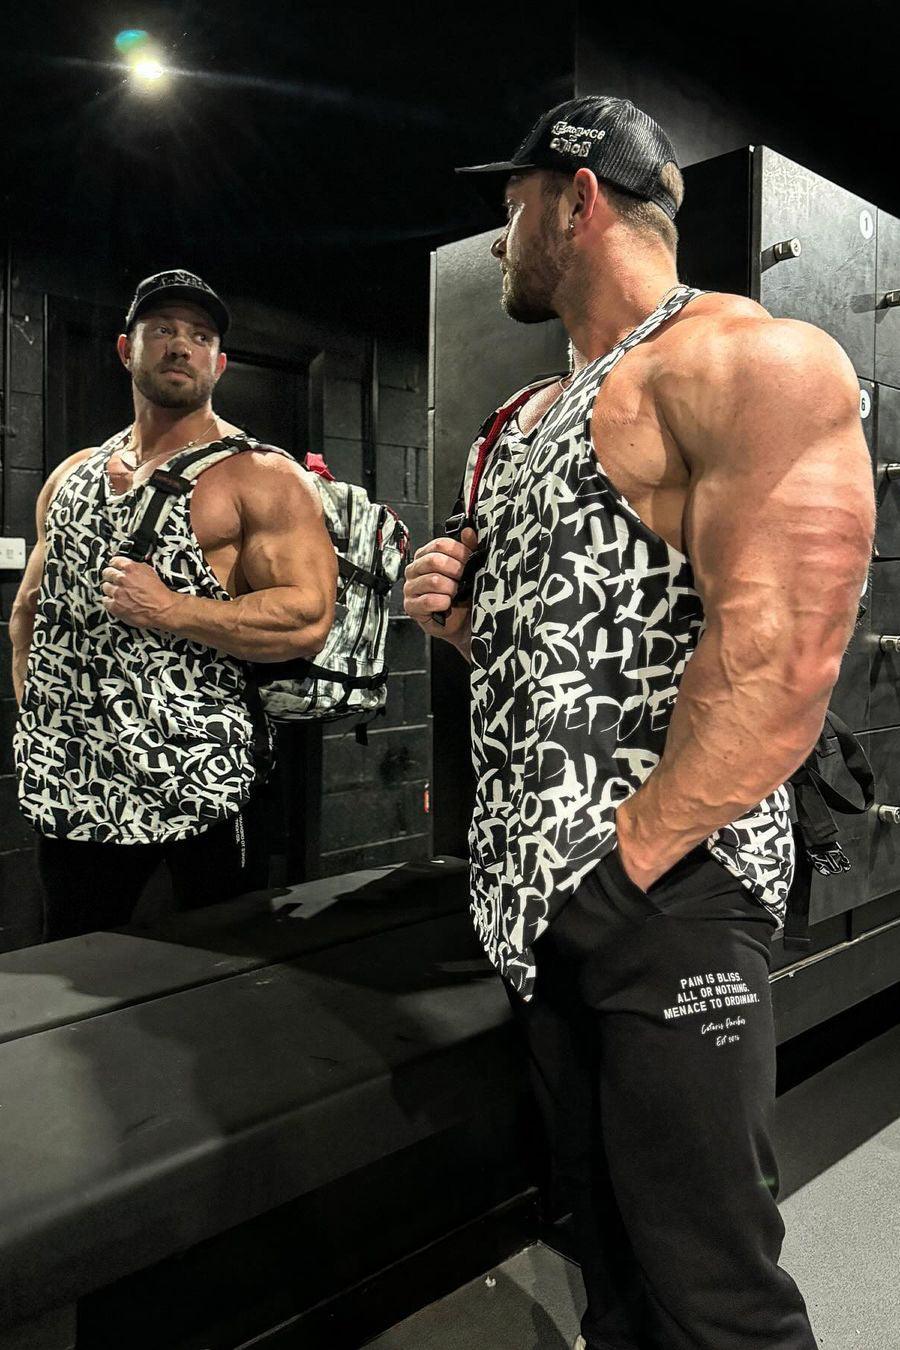 Graphic Muscle Stringer - Chaotic Black - Jed North